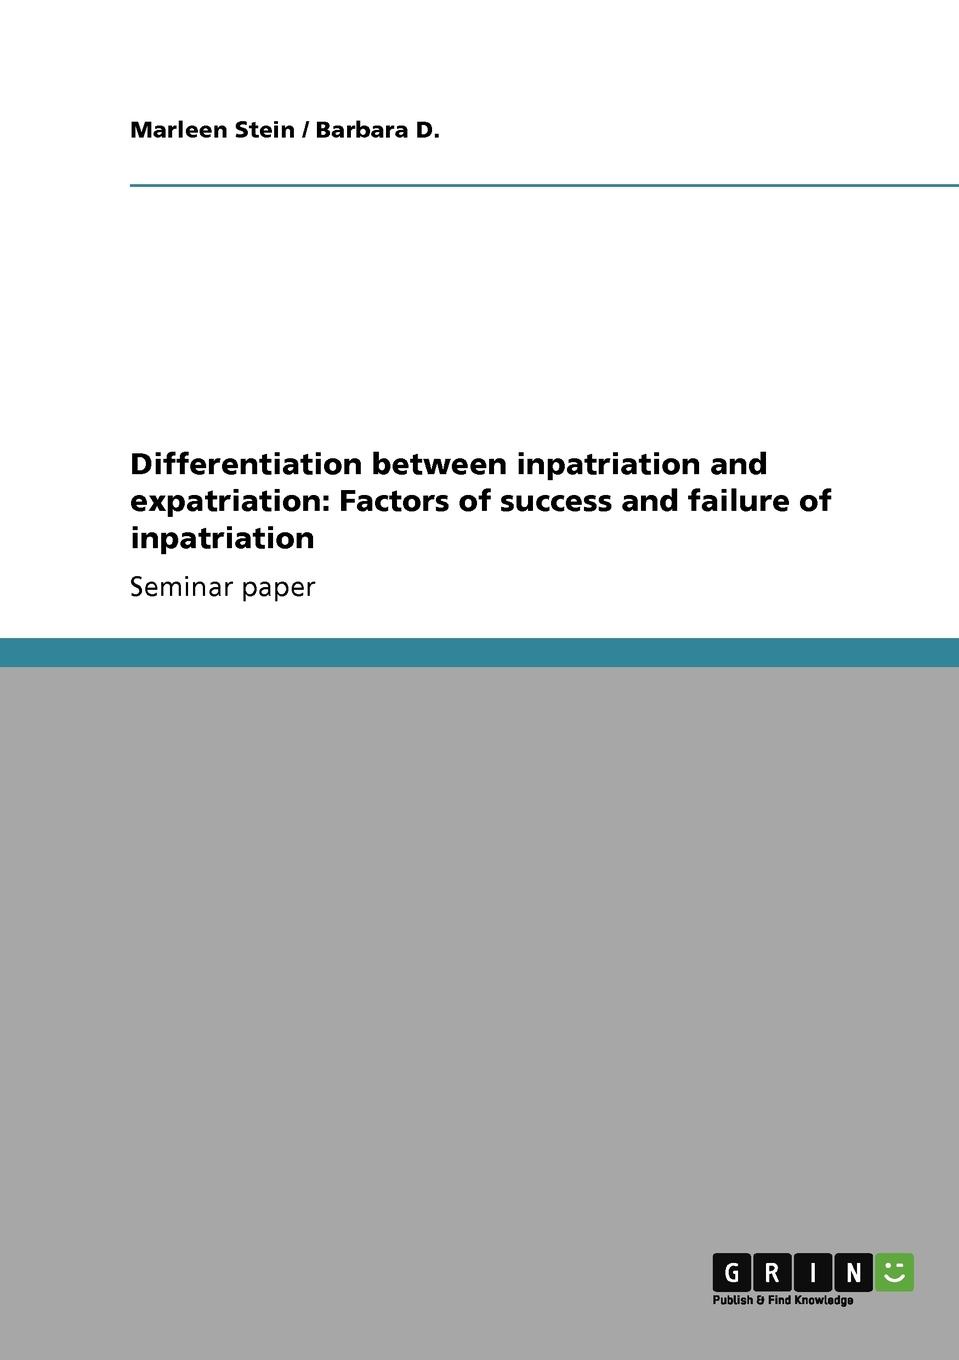 Differentiation between inpatriation and expatriation. Factors of success and failure of inpatriation